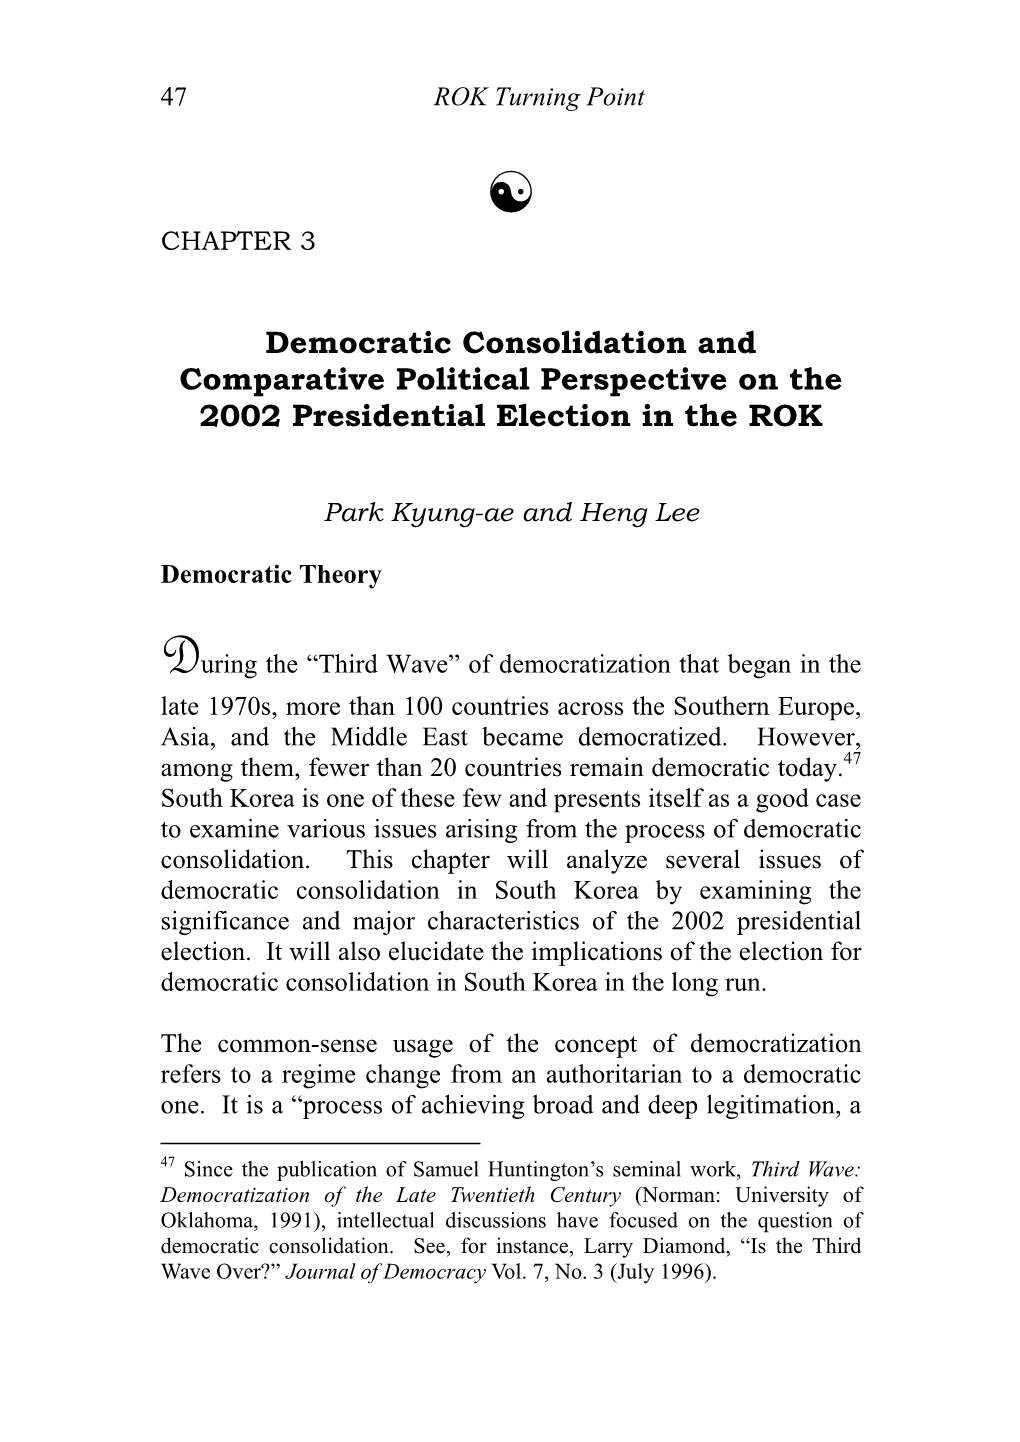 Democratic Consolidation and Comparative Political Perspective on the 2002 Presidential Election in the ROK